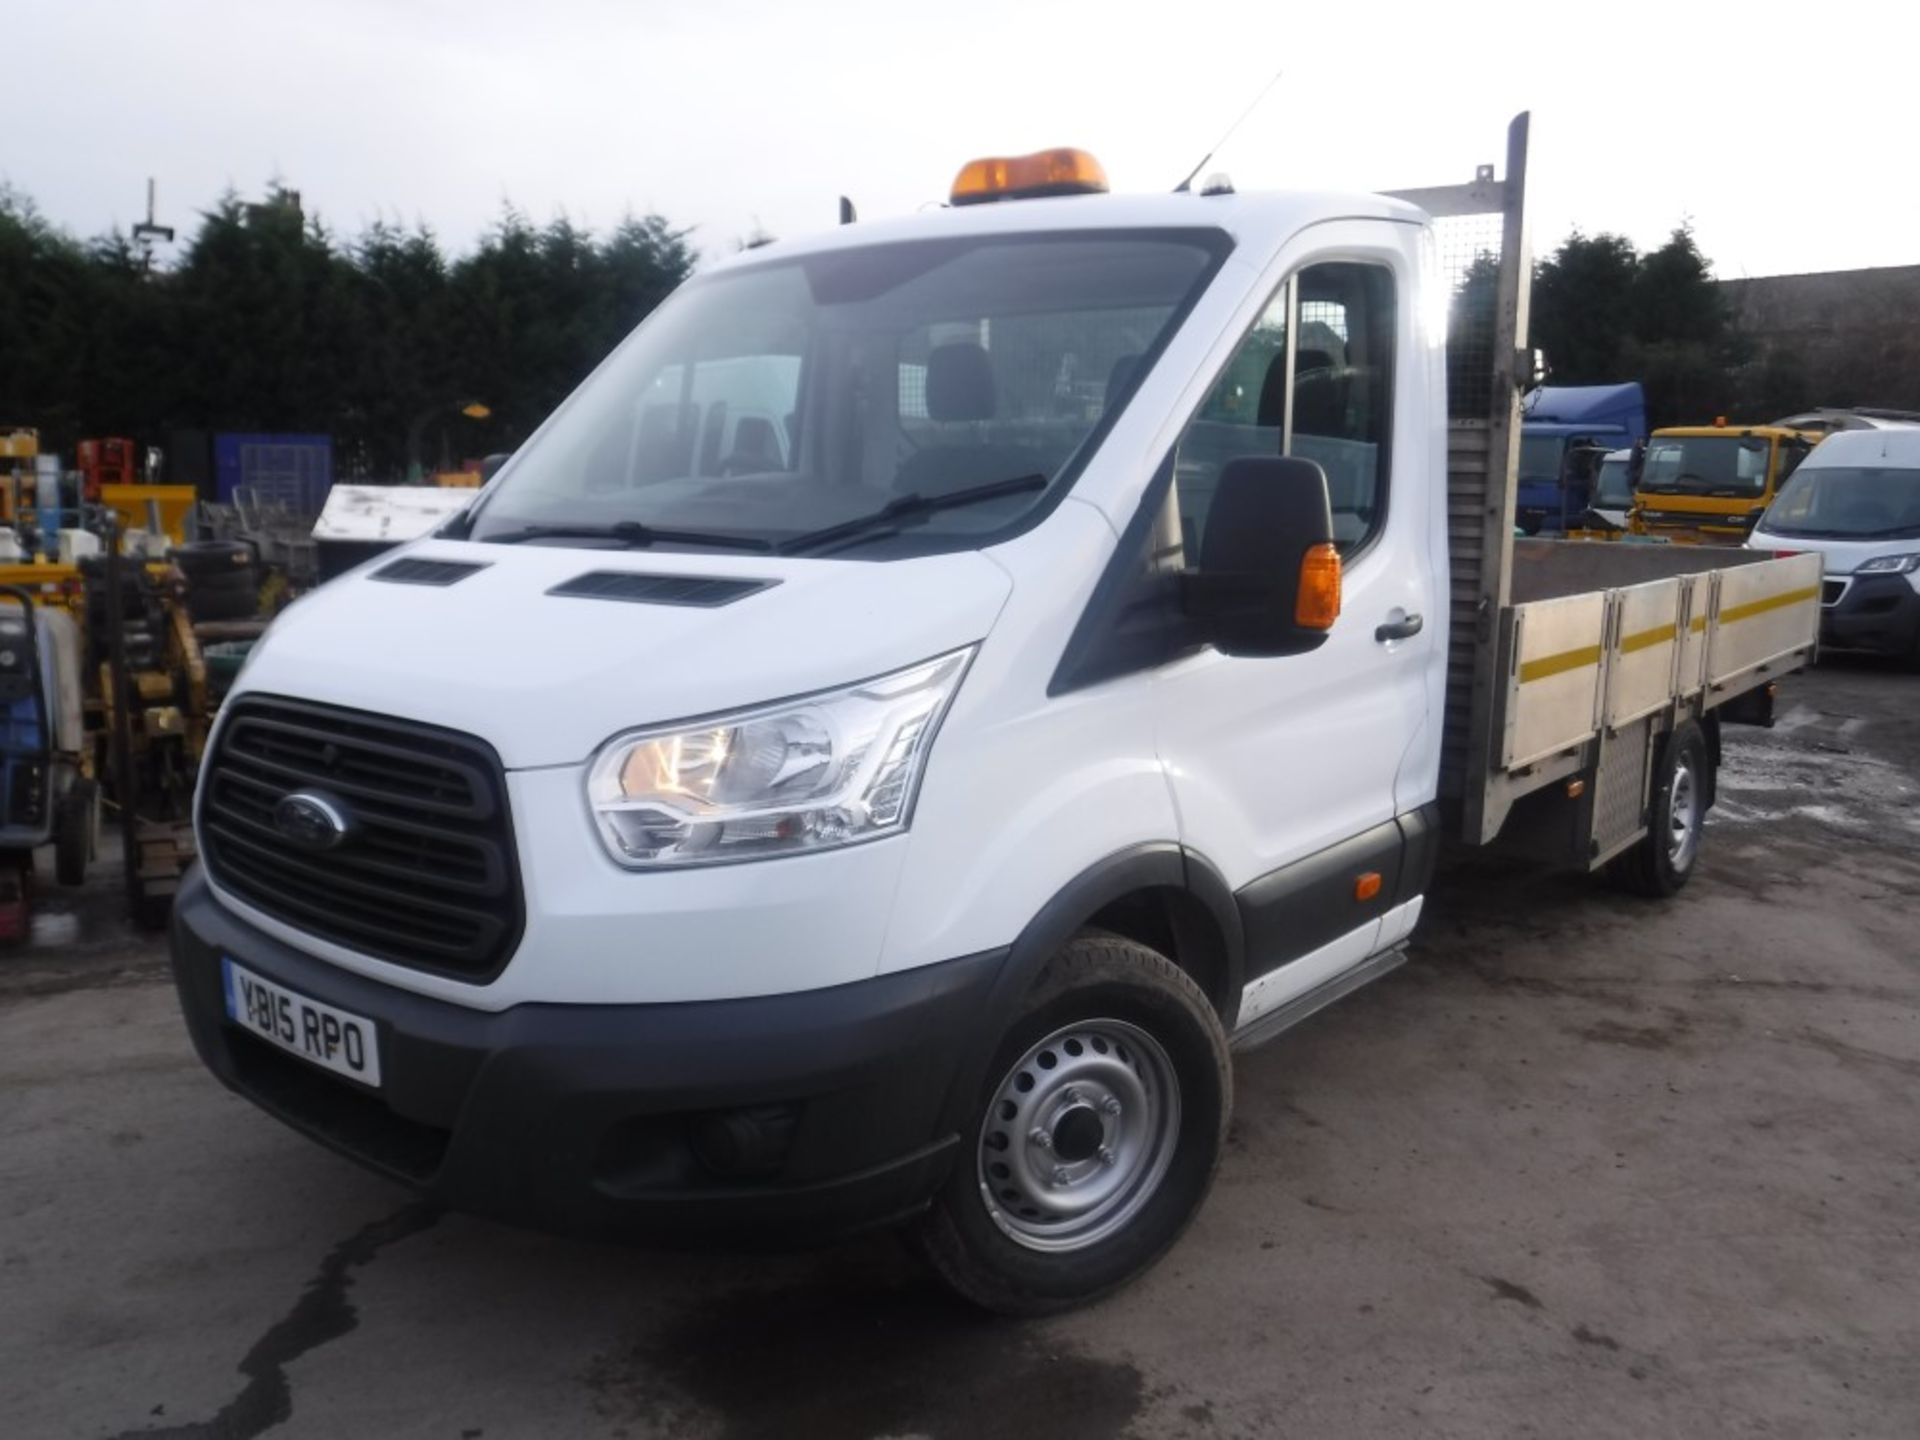 15 reg FORD TRANSIT 350 RWD DROPSIDE, 1ST REG 07/15, 117822M WARRANTED, V5 HERE, 1 OWNER FROM NEW [+ - Image 2 of 5